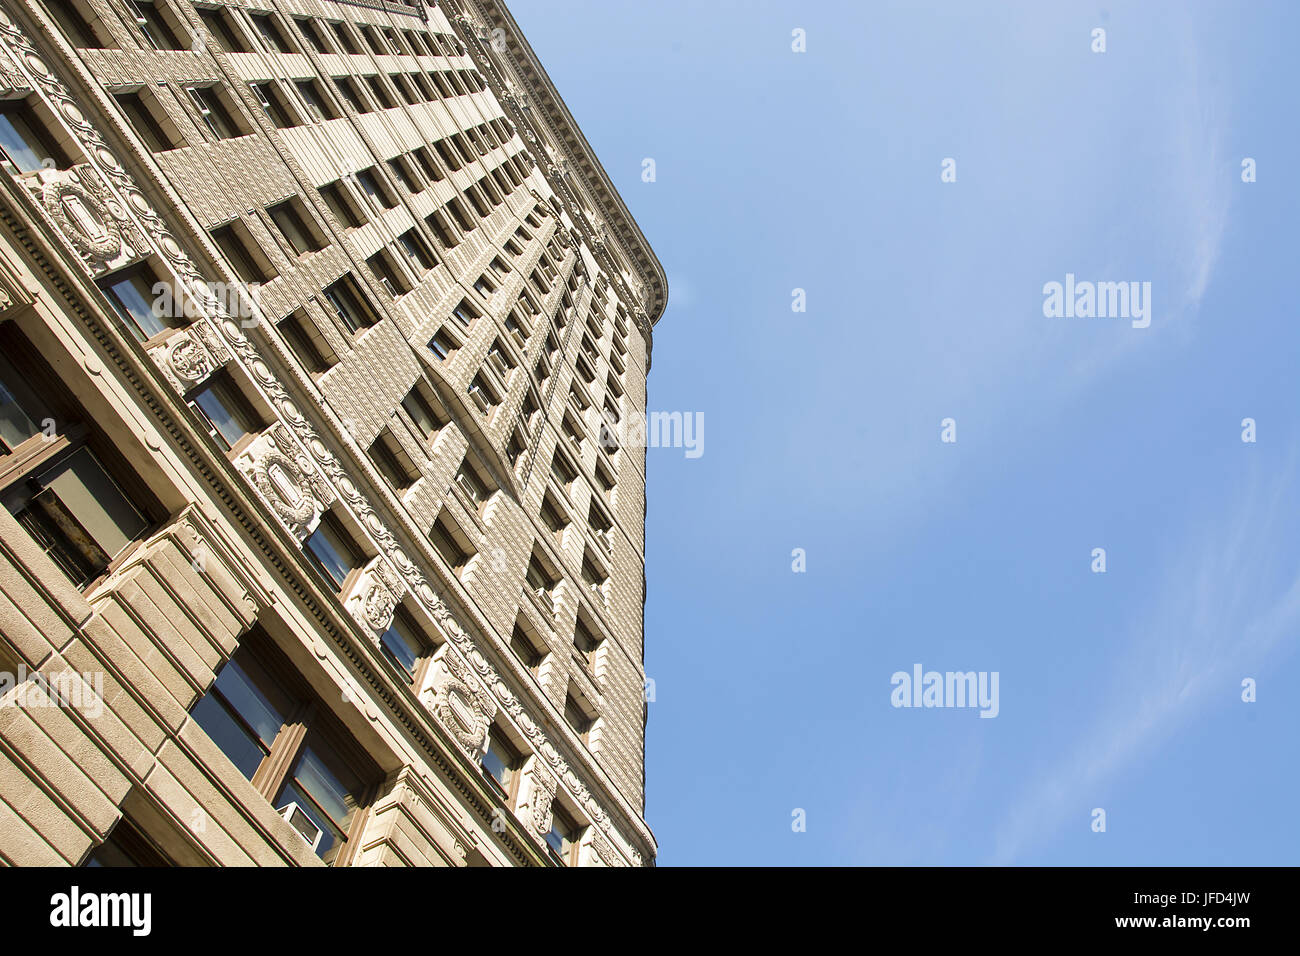 Flat Iron building from the bottom Stock Photo